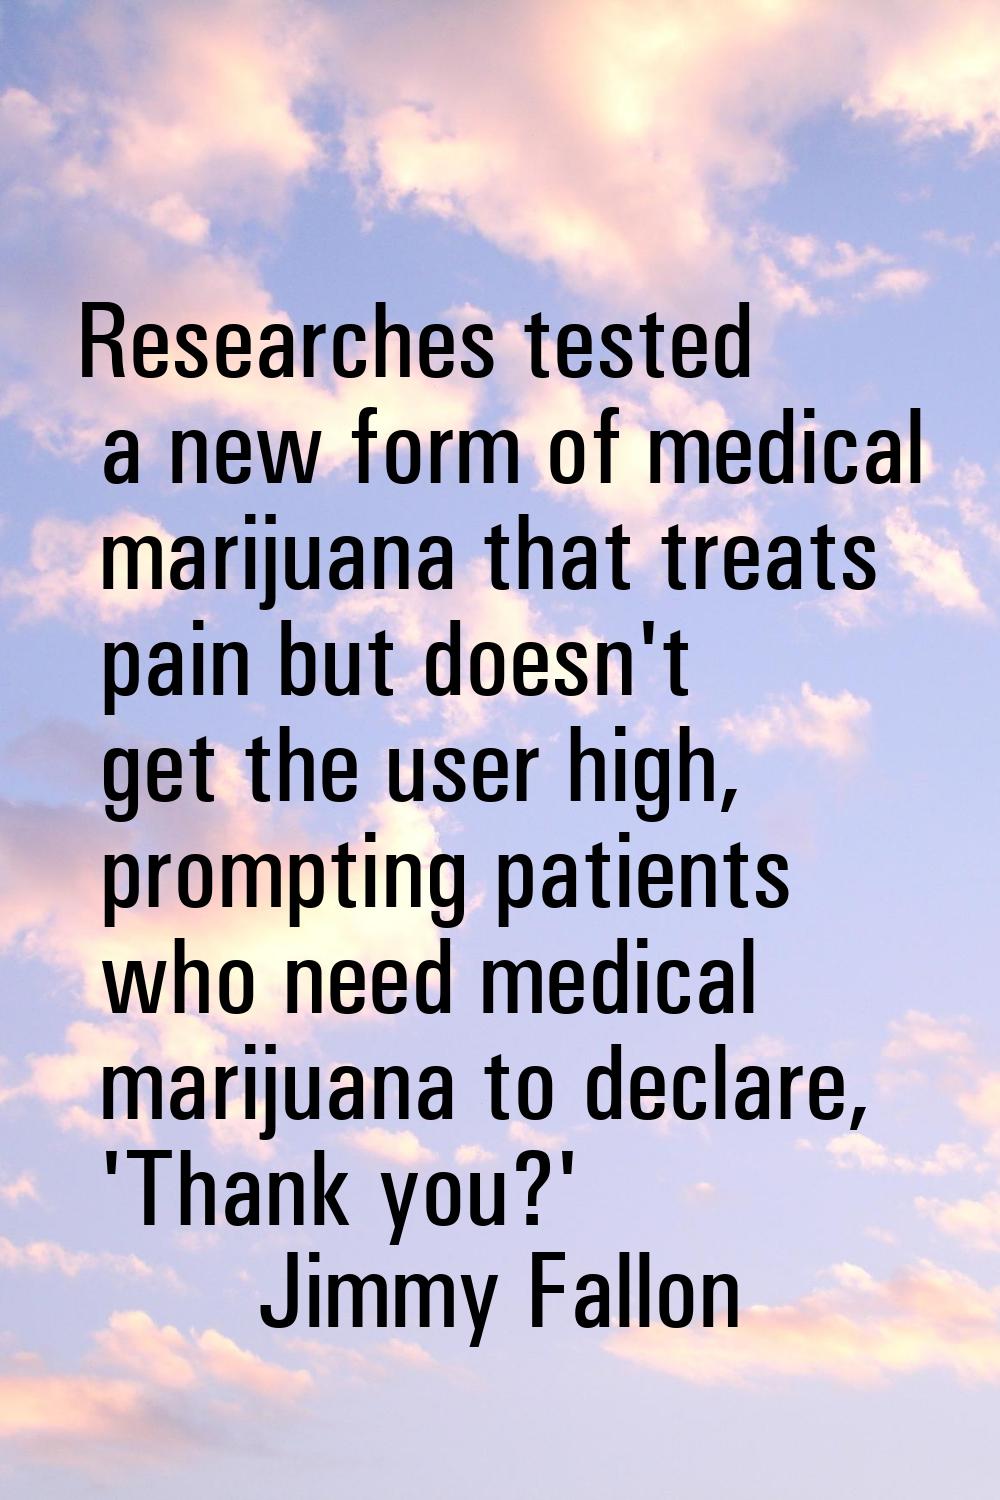 Researches tested a new form of medical marijuana that treats pain but doesn't get the user high, p